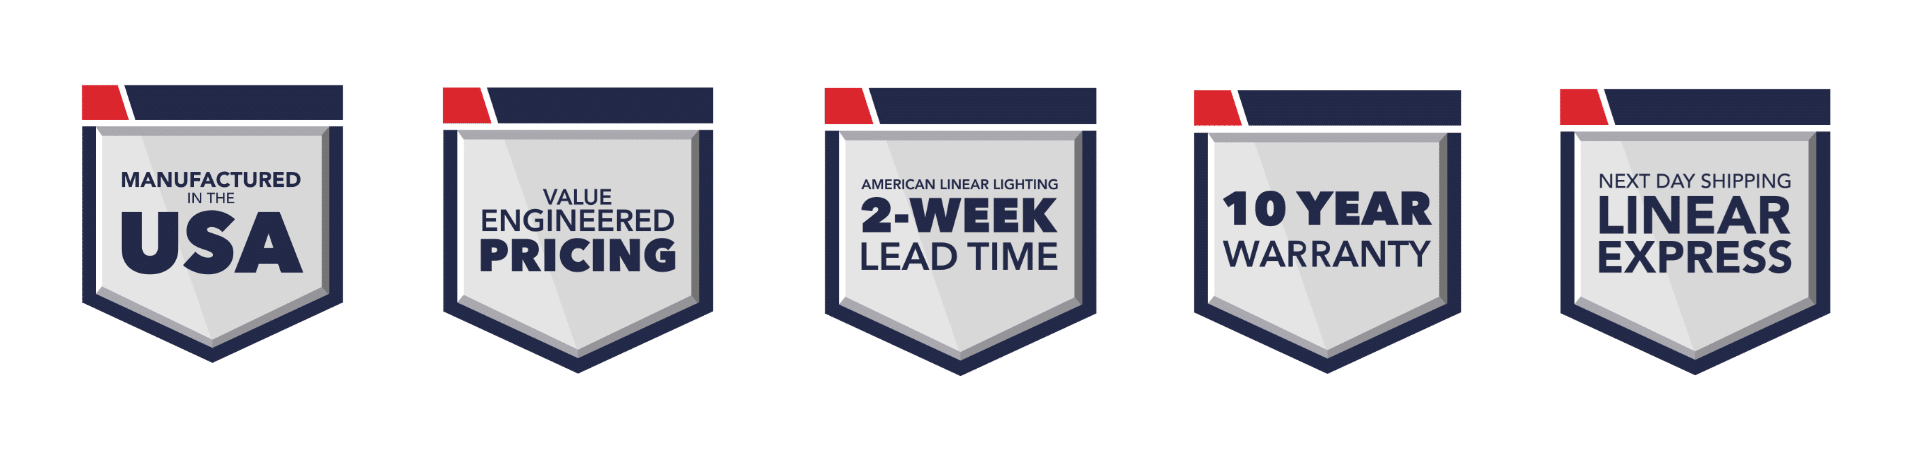 American Linear Lighting provides value engineered architectural led linear lighting that is manufactured in the USA. Light fixtures are available with a two week lead time or next-day ship on selected luminaires.